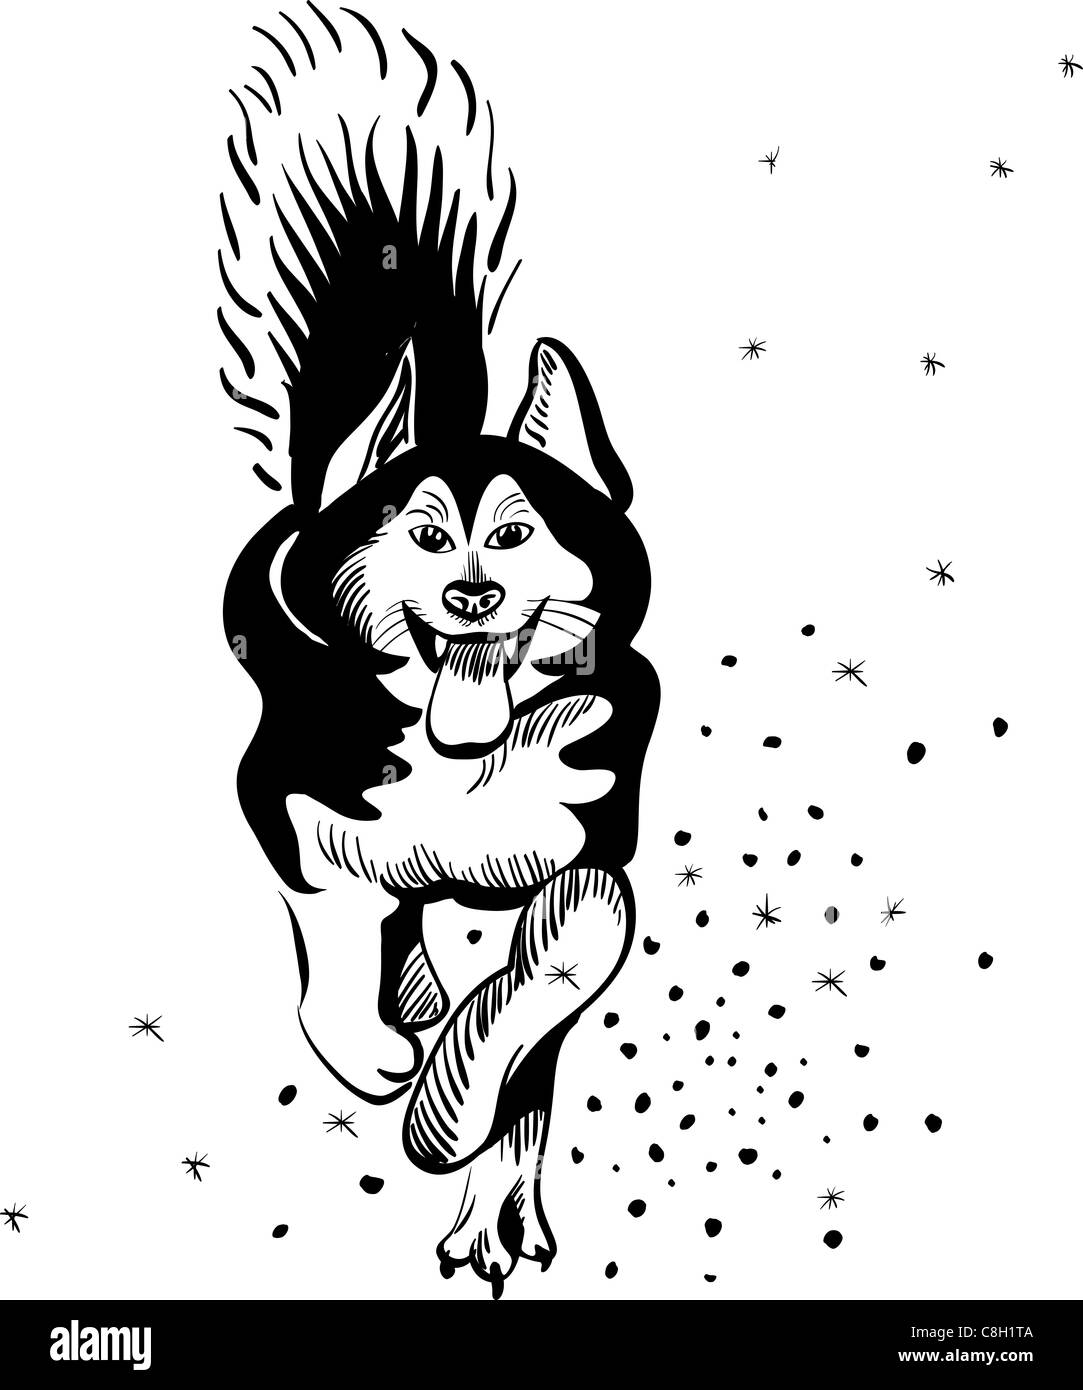 black and white sketch of a sled dog Alaskan malamute running in the snow tongue hanging out Stock Photo